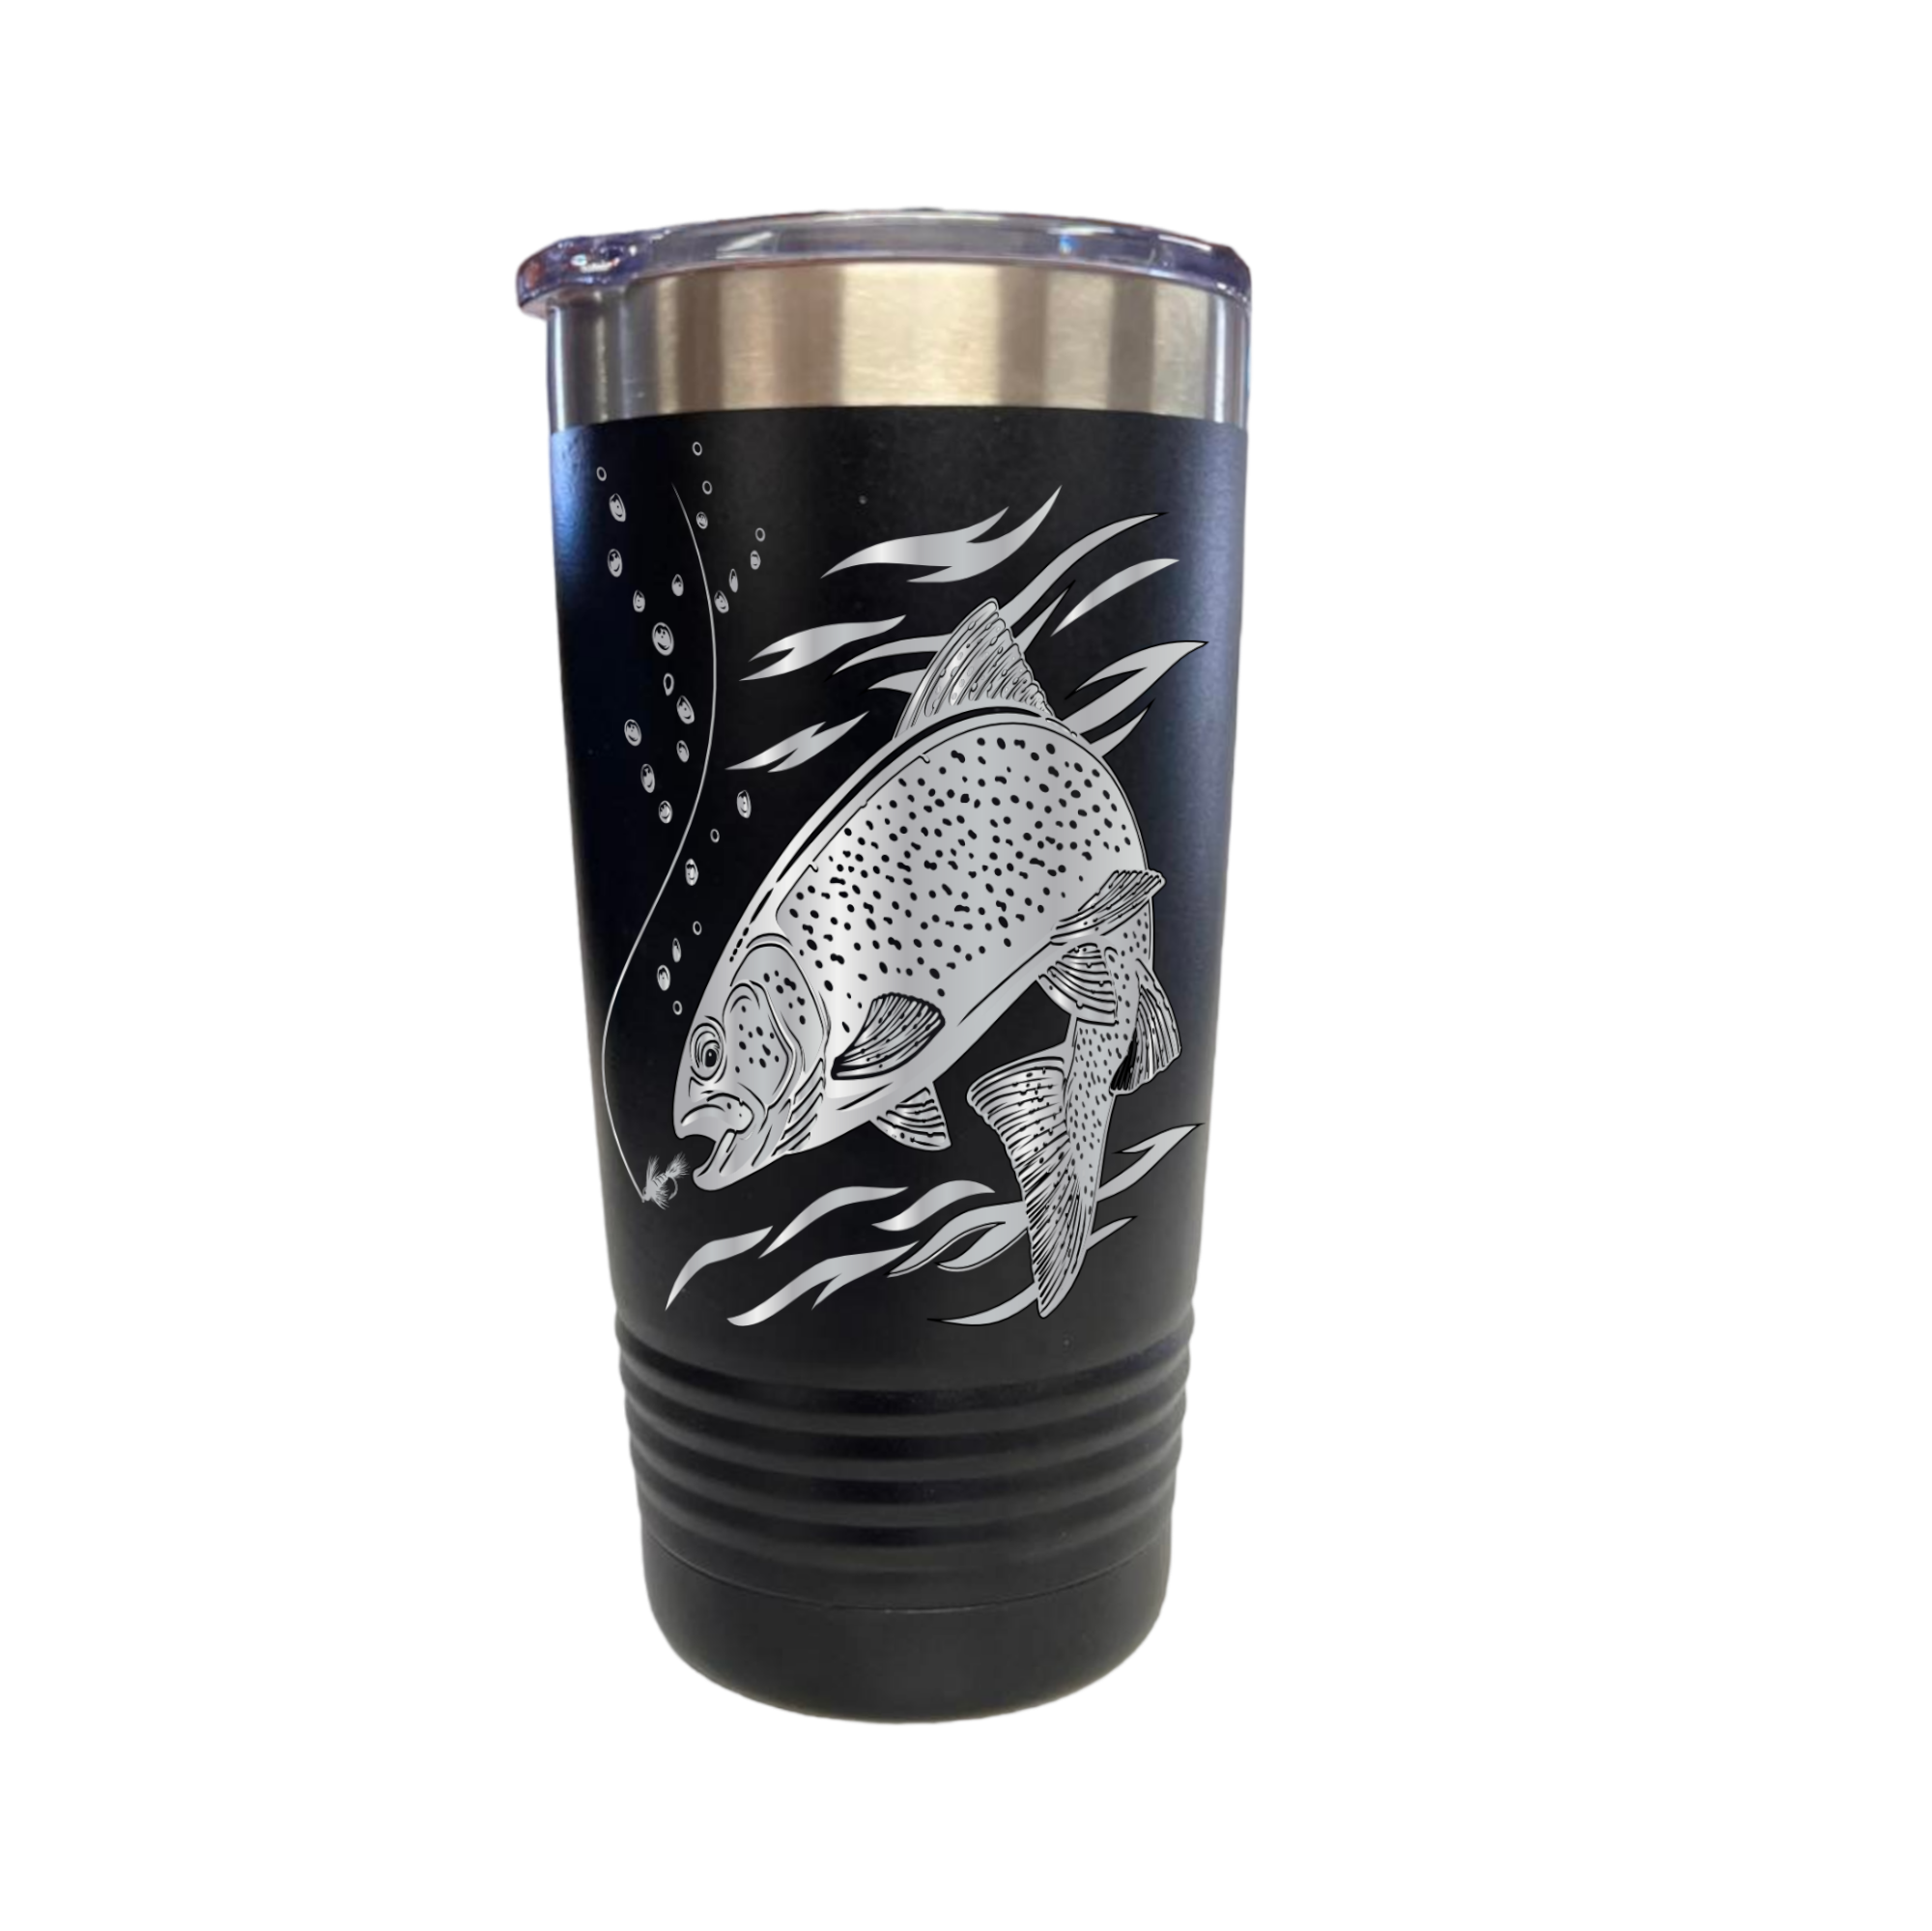 Rainbow Trout Fishing Yeti Rambler - Wind River Outpost